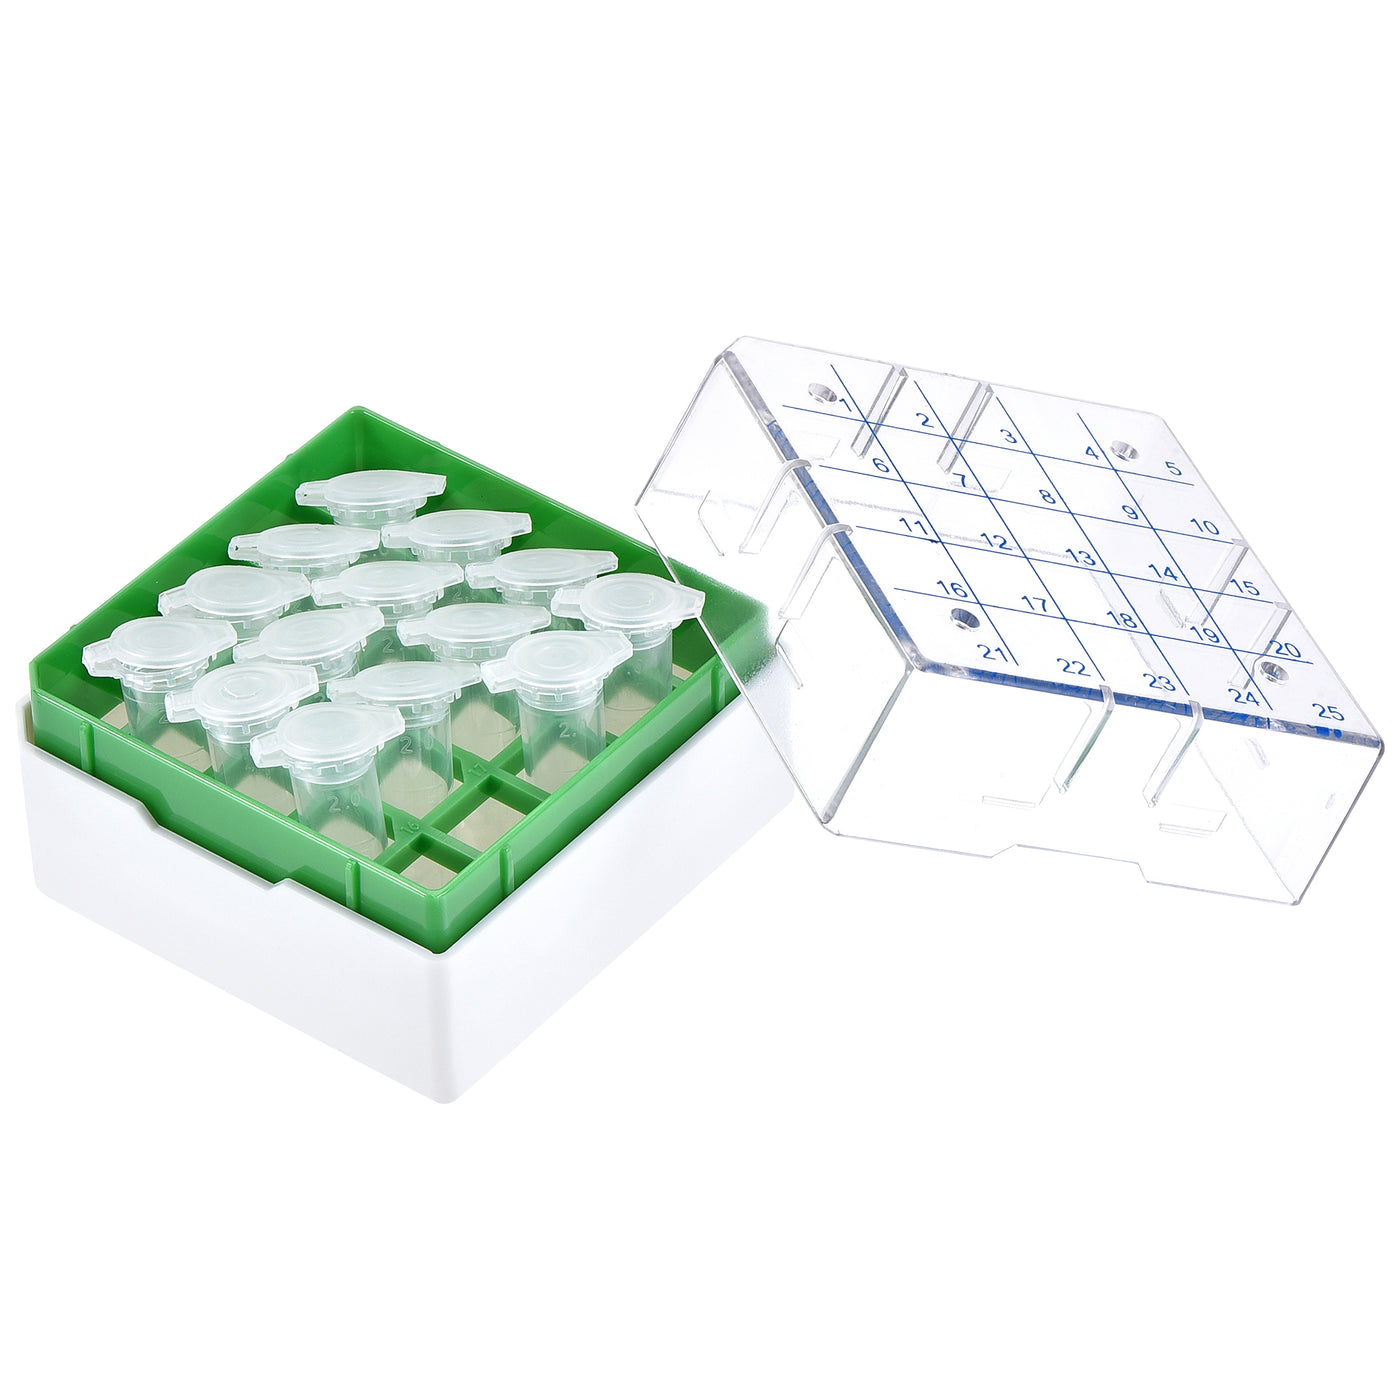 uxcell Uxcell Freezer Tube Box 25 Places Polypropylene Holder Rack for 1.8/2ml Microcentrifuge Tubes, Green